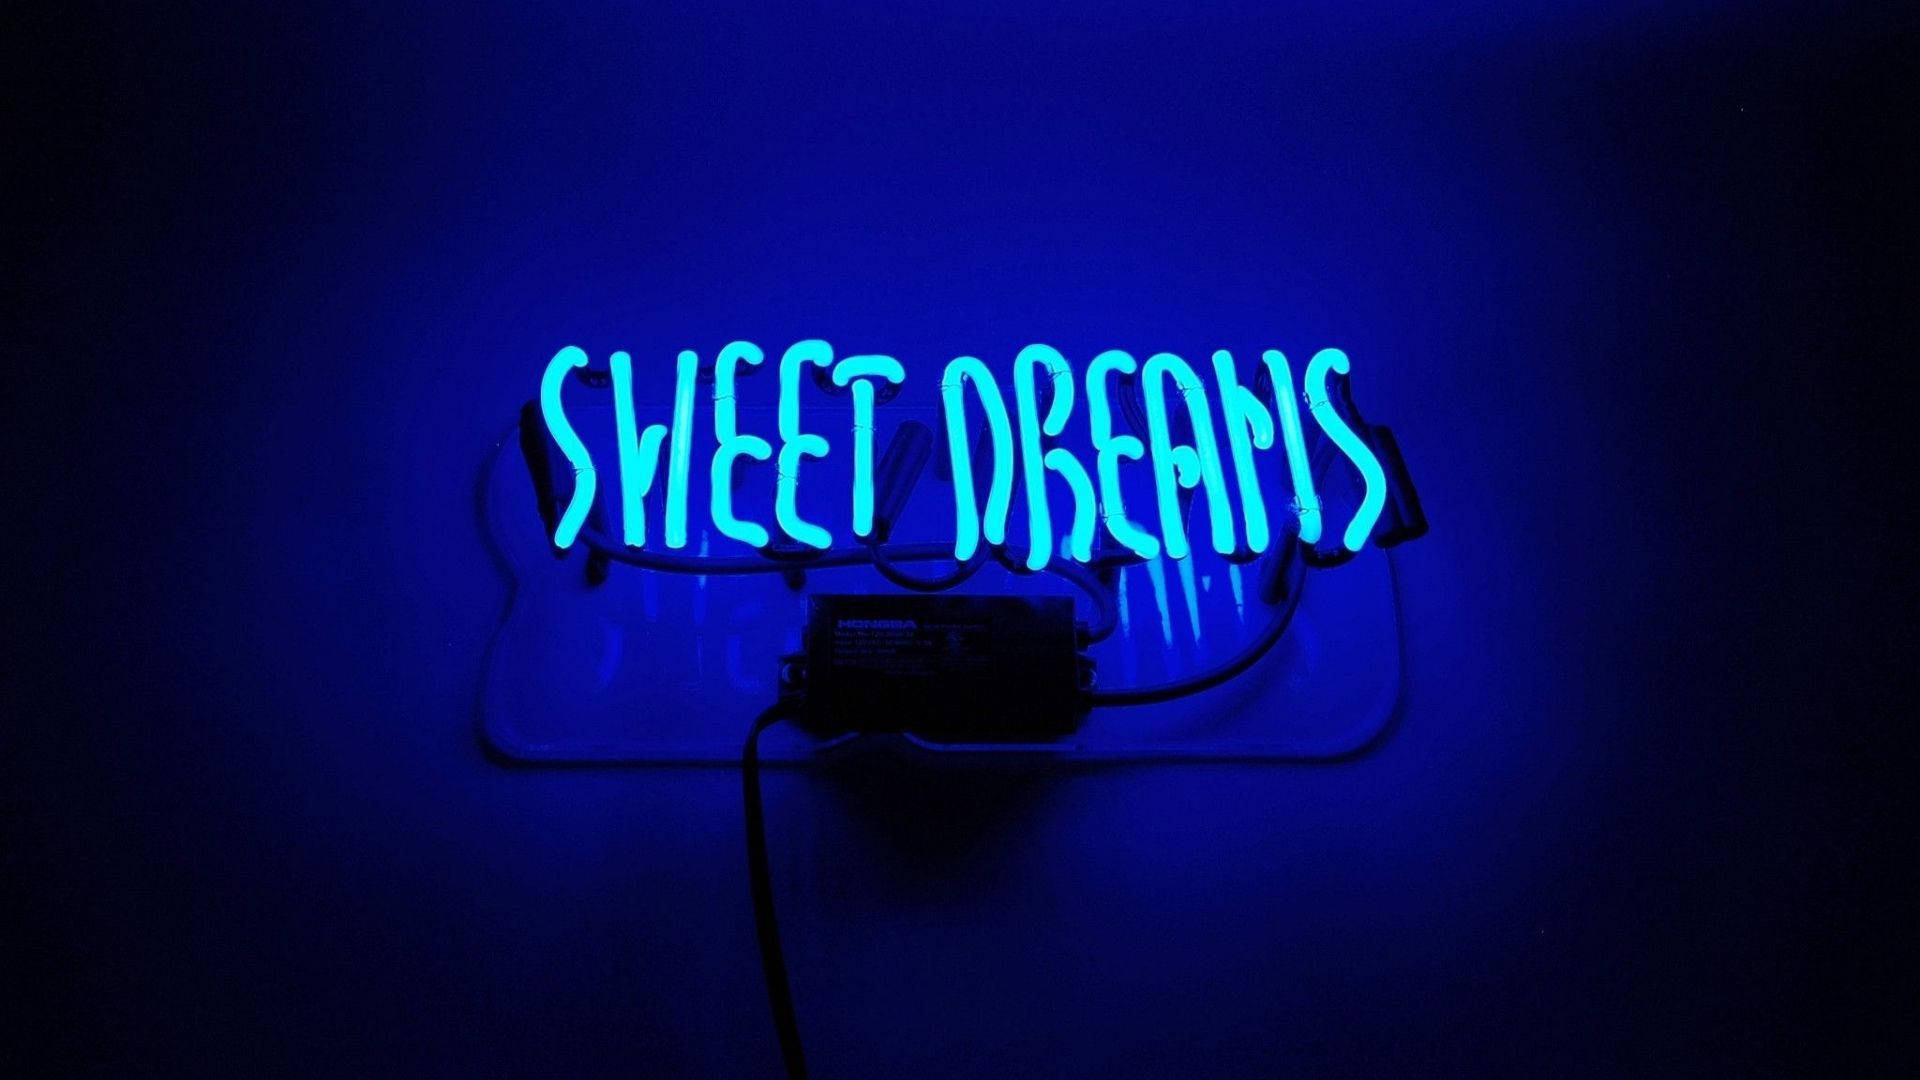 Neon Blue Sweet Dreams Signage Background